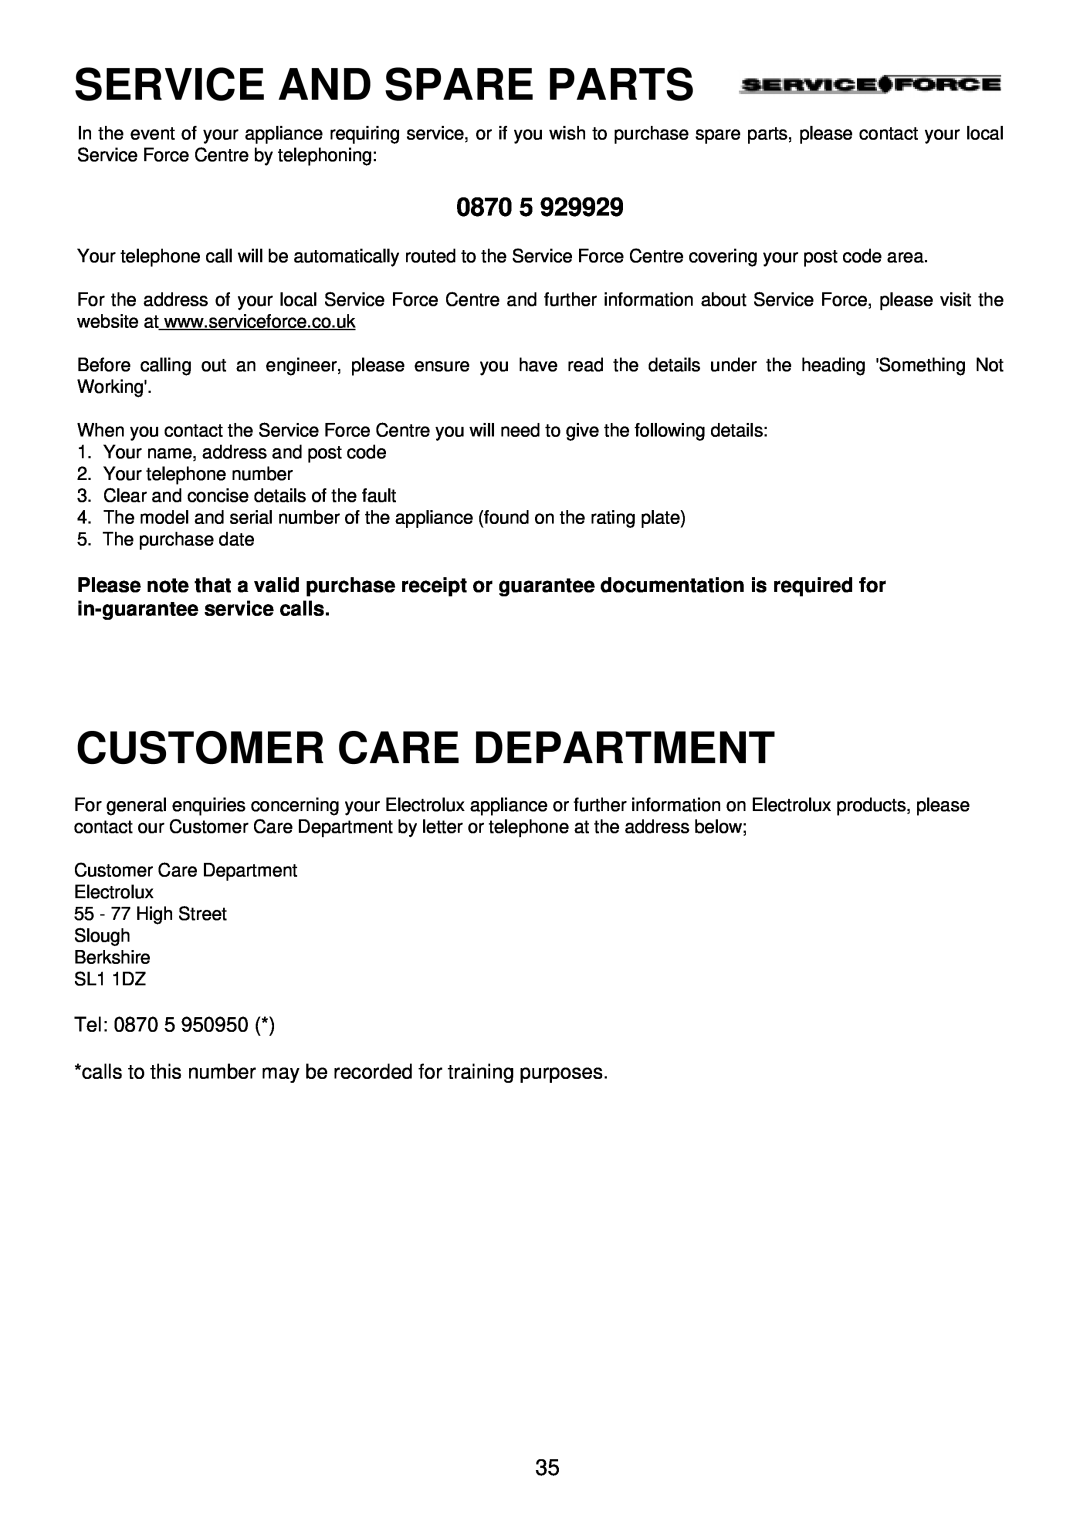 Electrolux EDB 876 manual 0870 5, Service And Spare Parts, Customer Care Department 